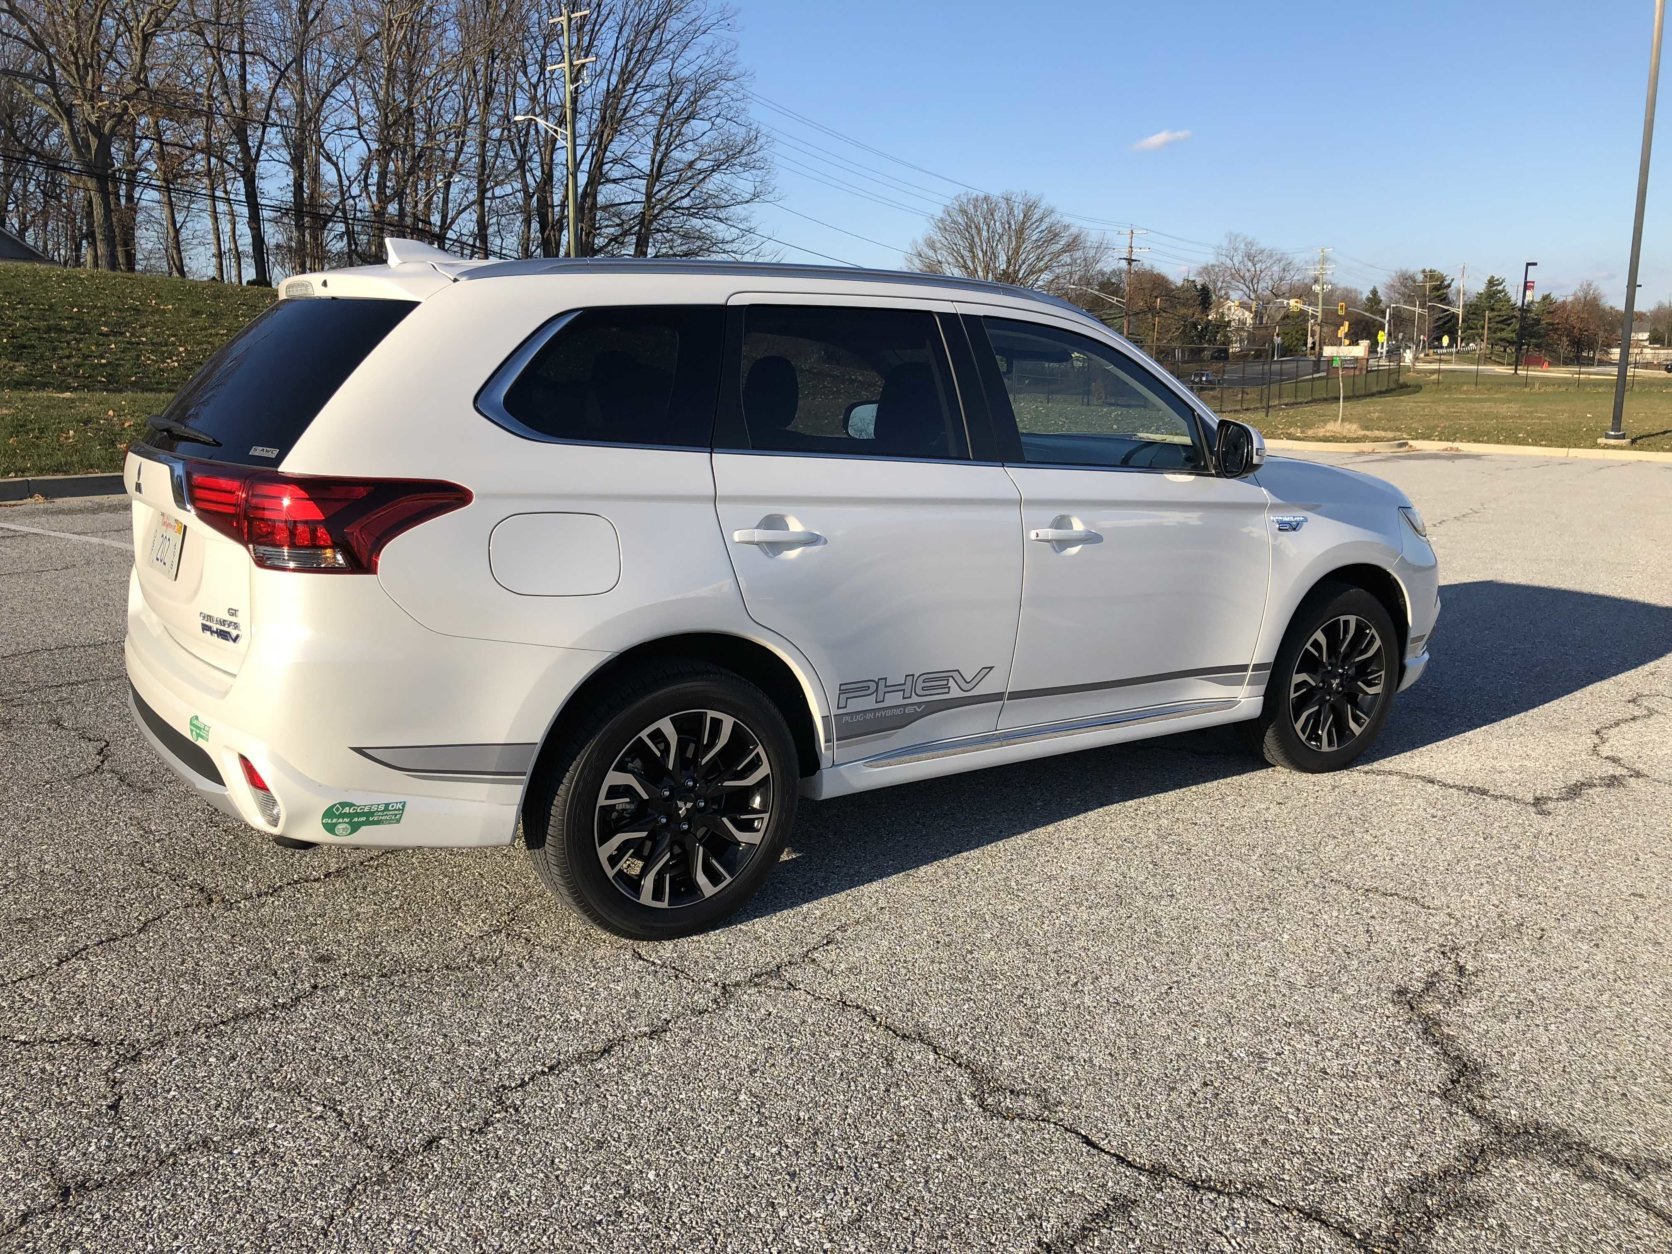 Car Review: Mitsubishi Outlander PHEV lets you plug in, use less gas - WTOP  News